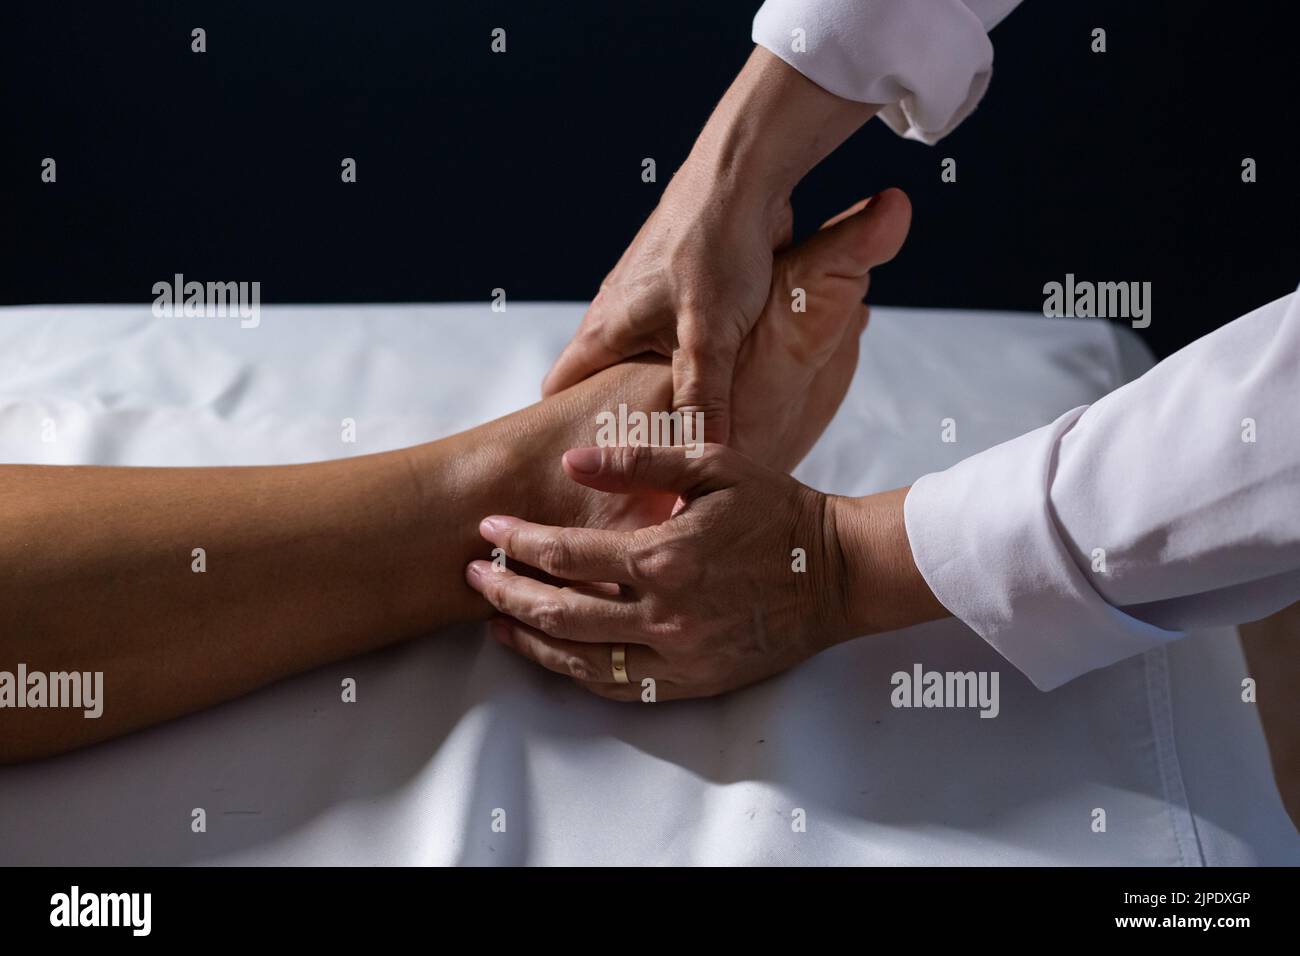 Goiânia, Goias, Brazil – July 18, 2022: Detail of masseuse hands applying therapeutic massage on the foot of a patient who is lying. Stock Photo